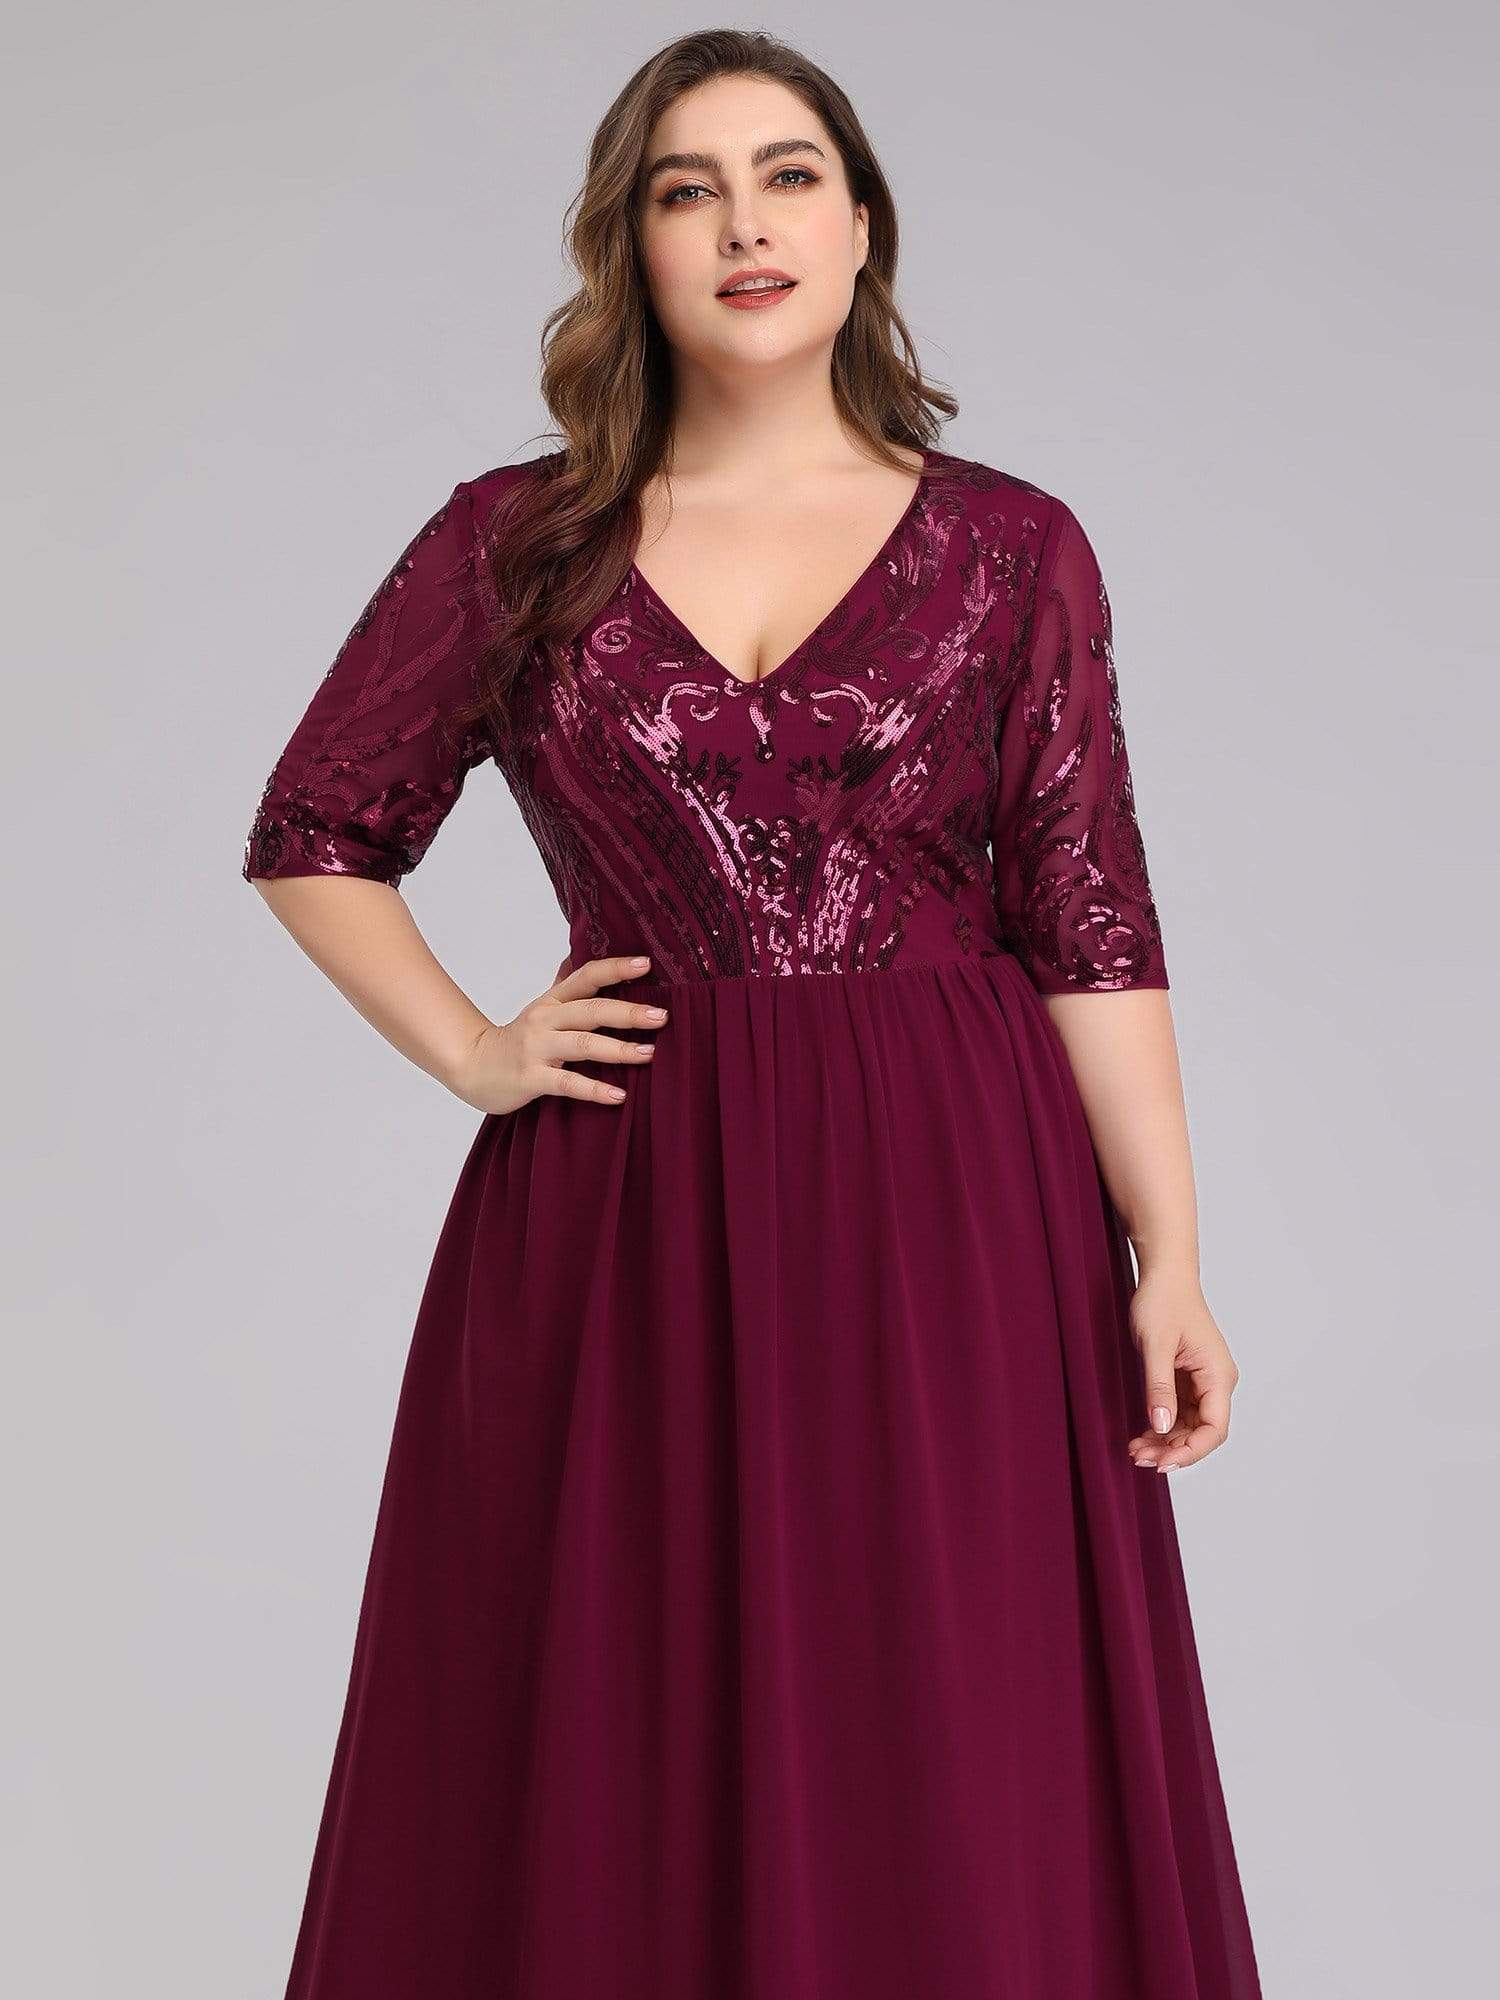 Plus Size Mother Of The Bride Dresses For Weddings with Half Sleeve